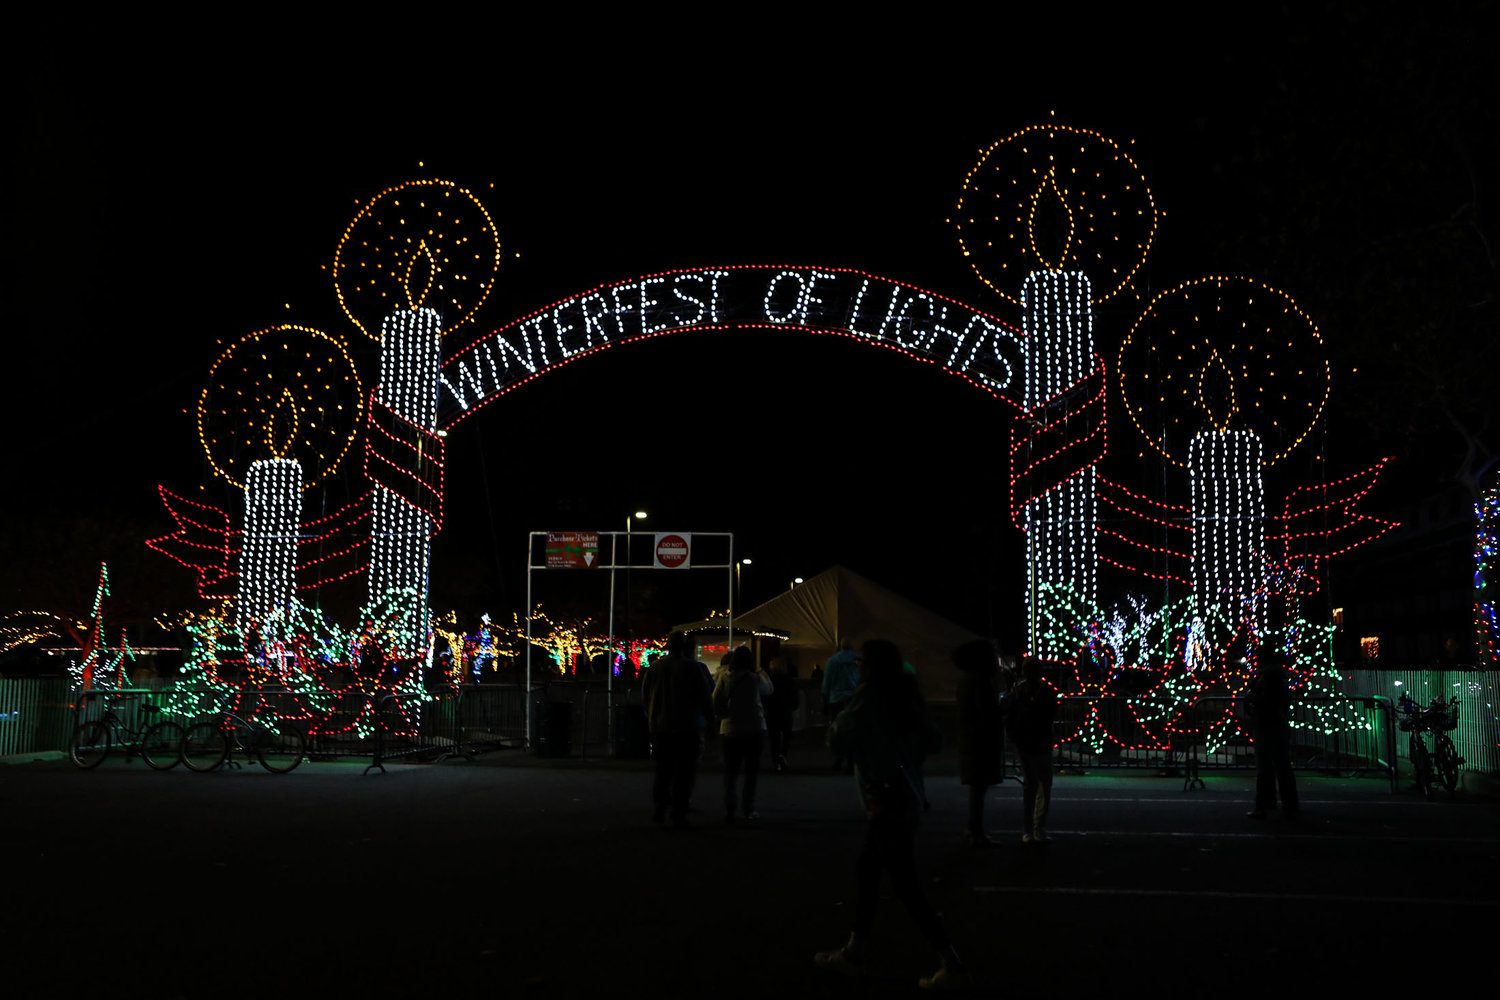 The Winterfest of Lights in Ocean City features an expanded walking tour that takes visitors through thousands of sparkling holiday lights and animated light displays.